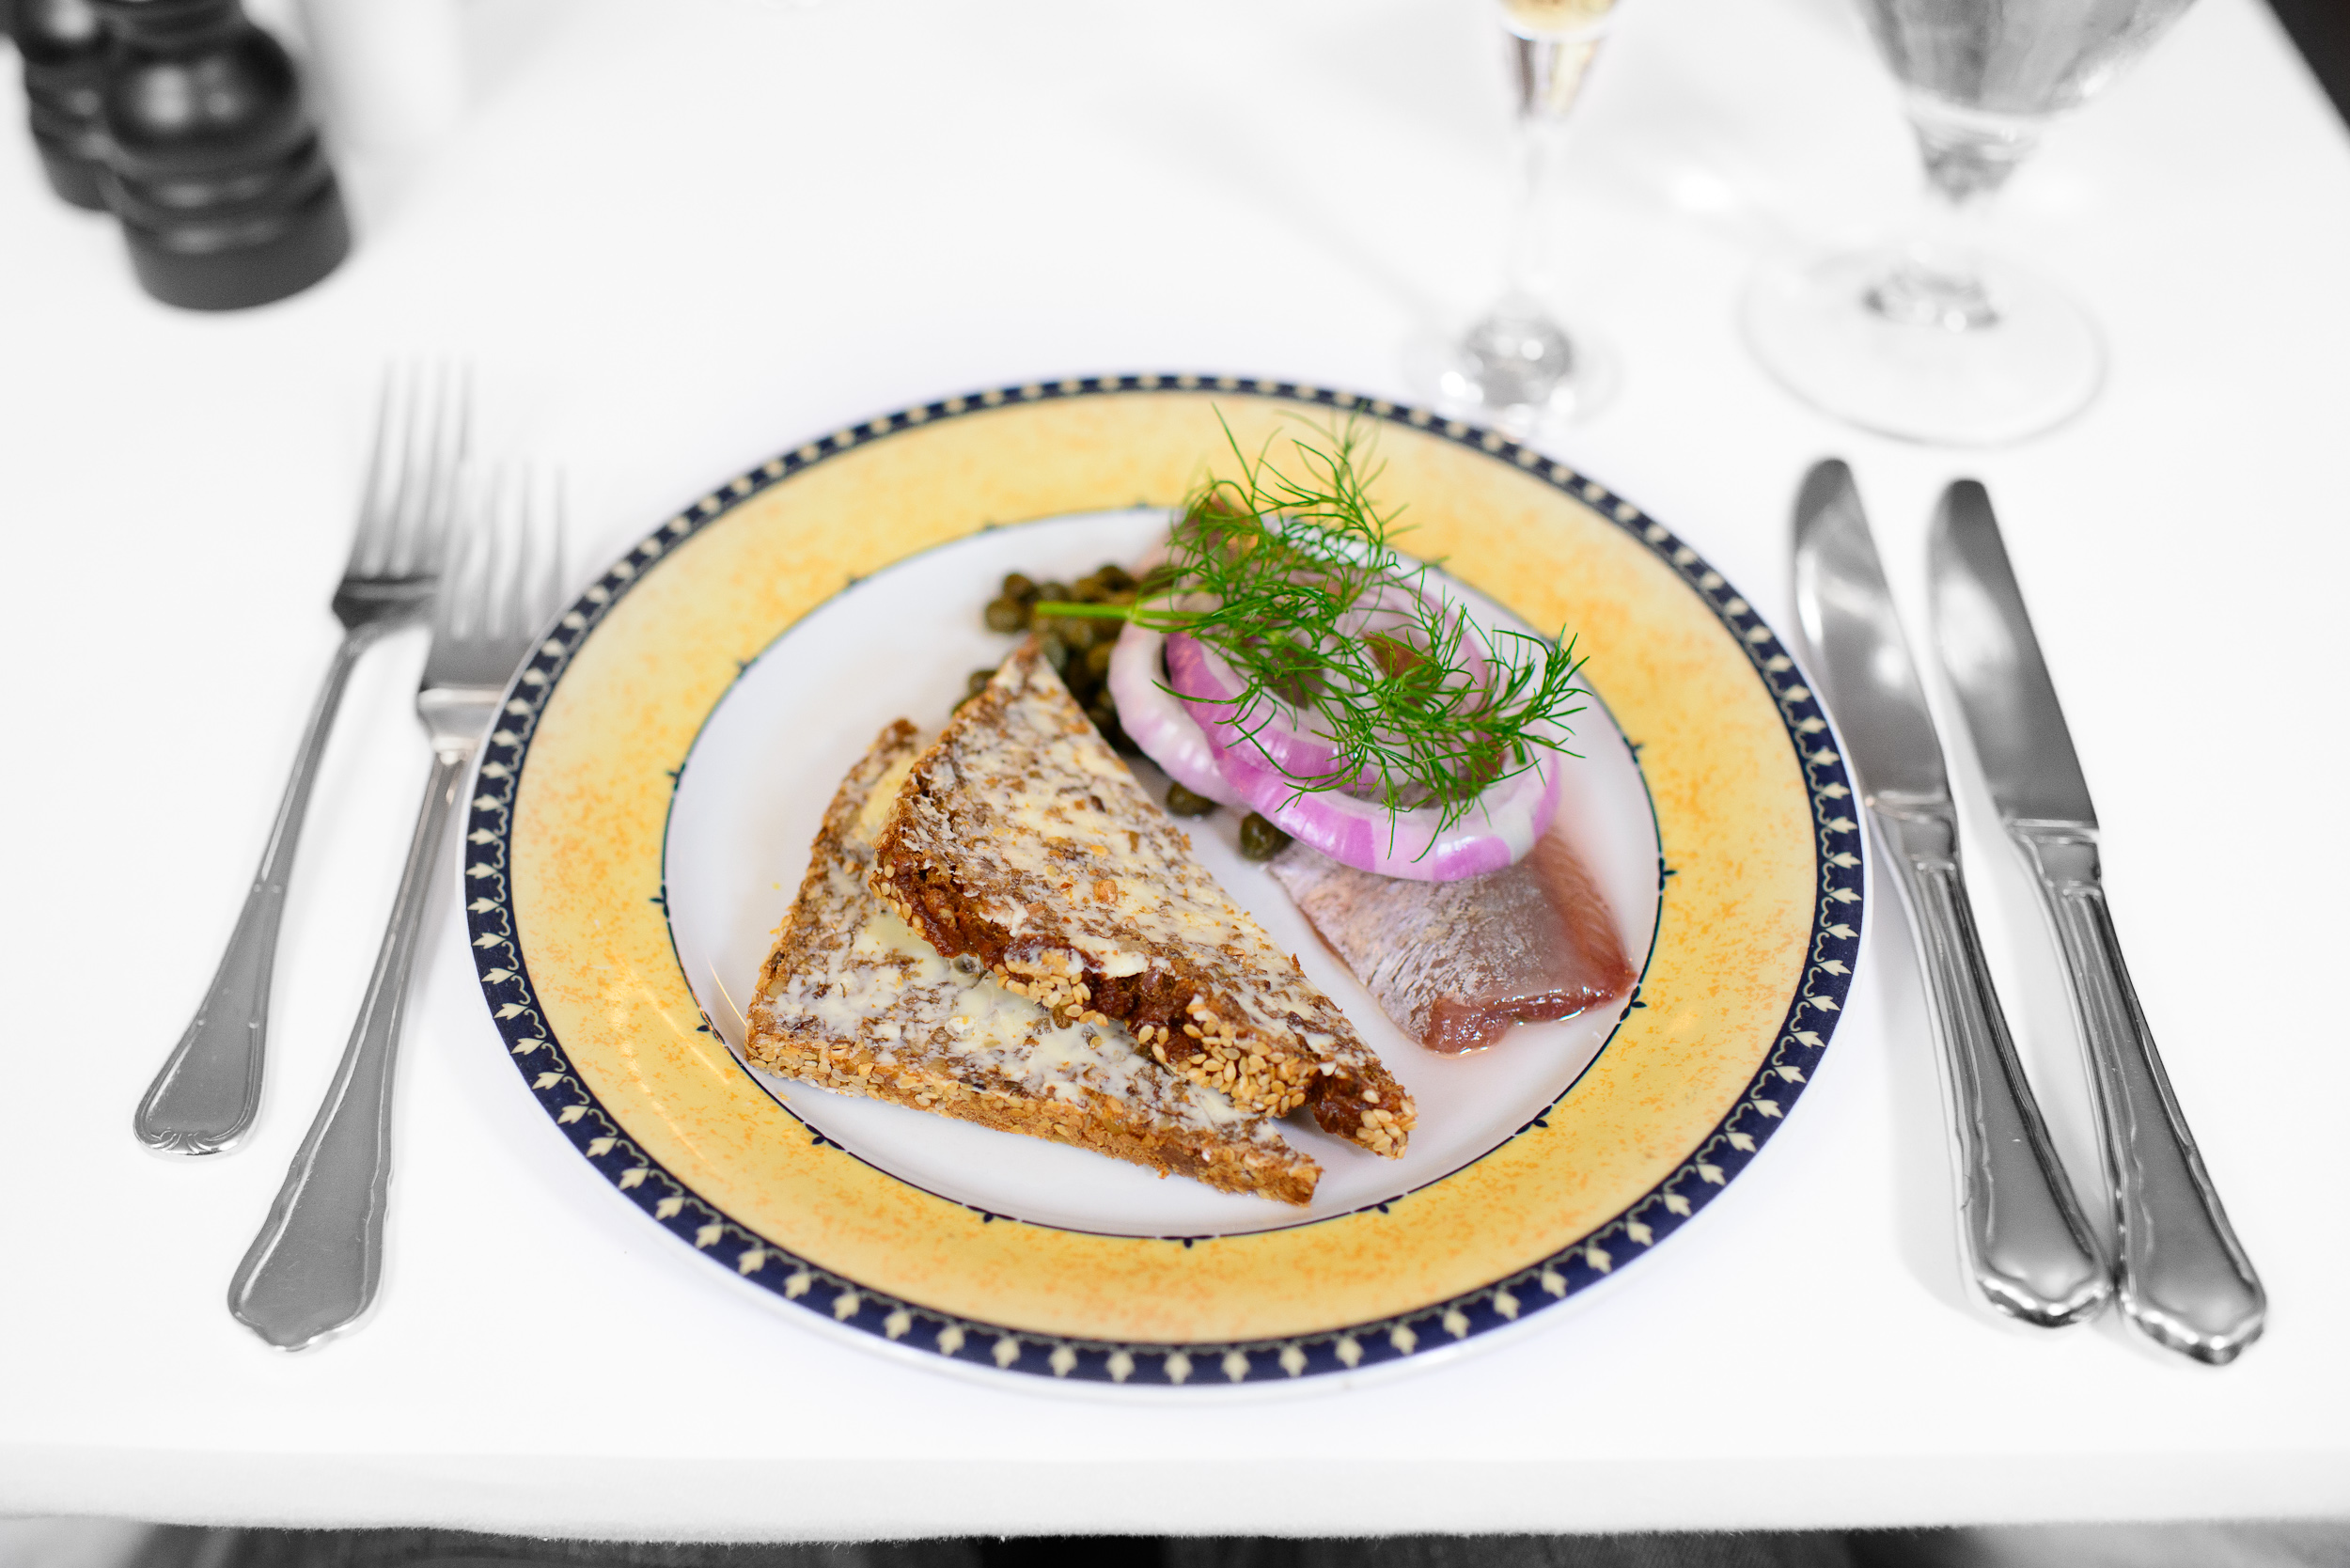 Pickled barrel herring from Iceland, capers and onions